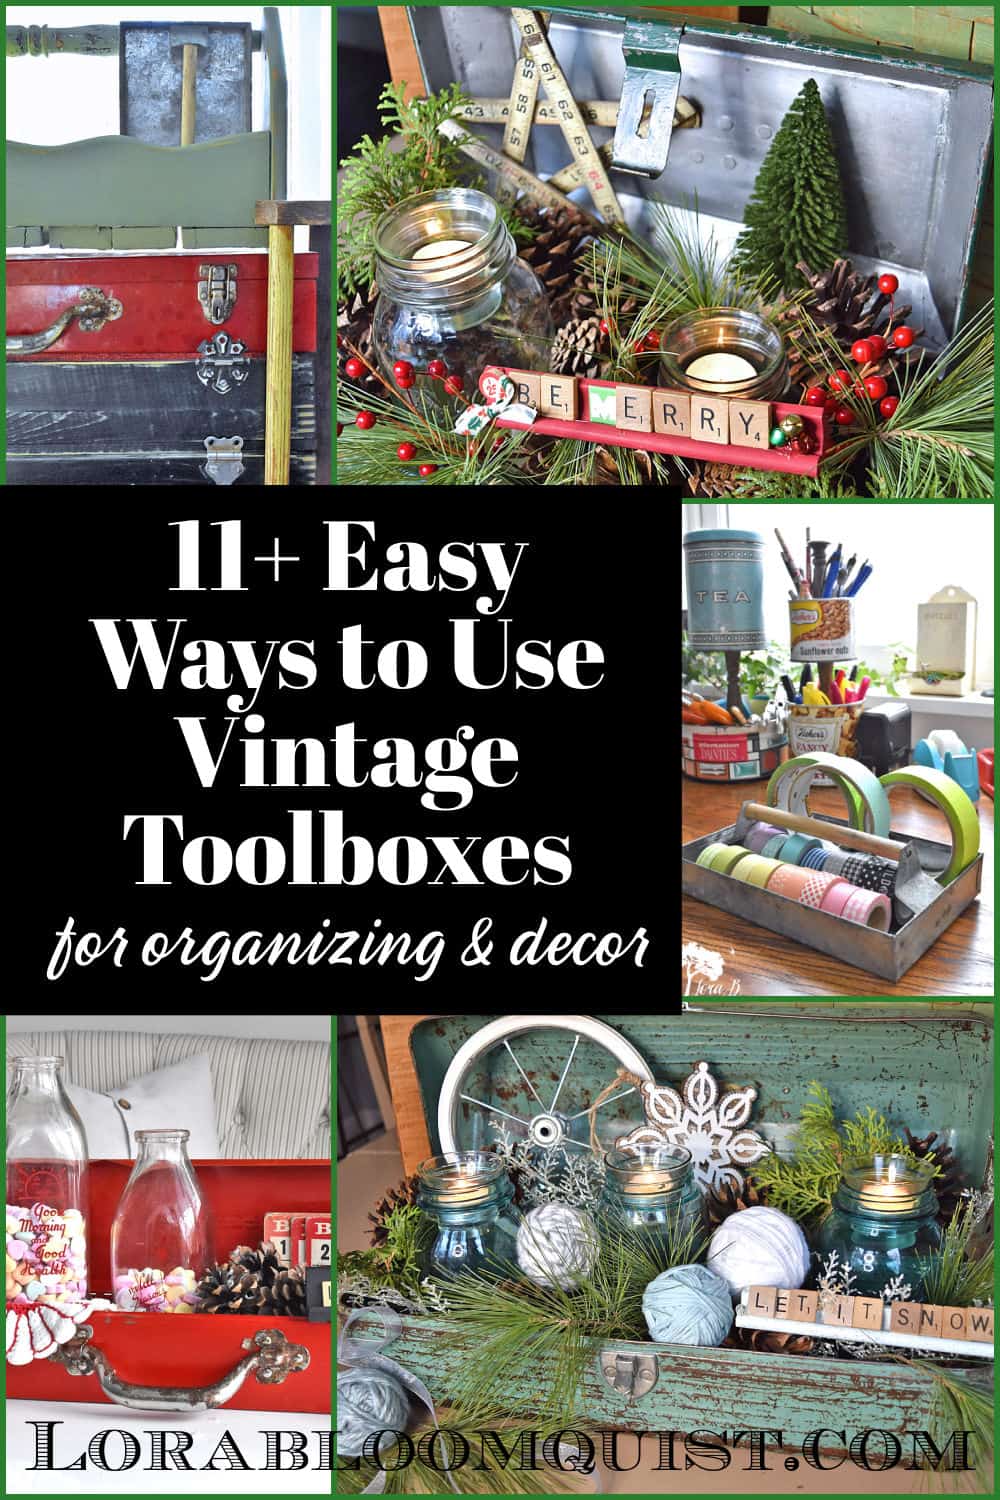 11+ Creative Ways to Use Old Tool Boxes (all through the house)